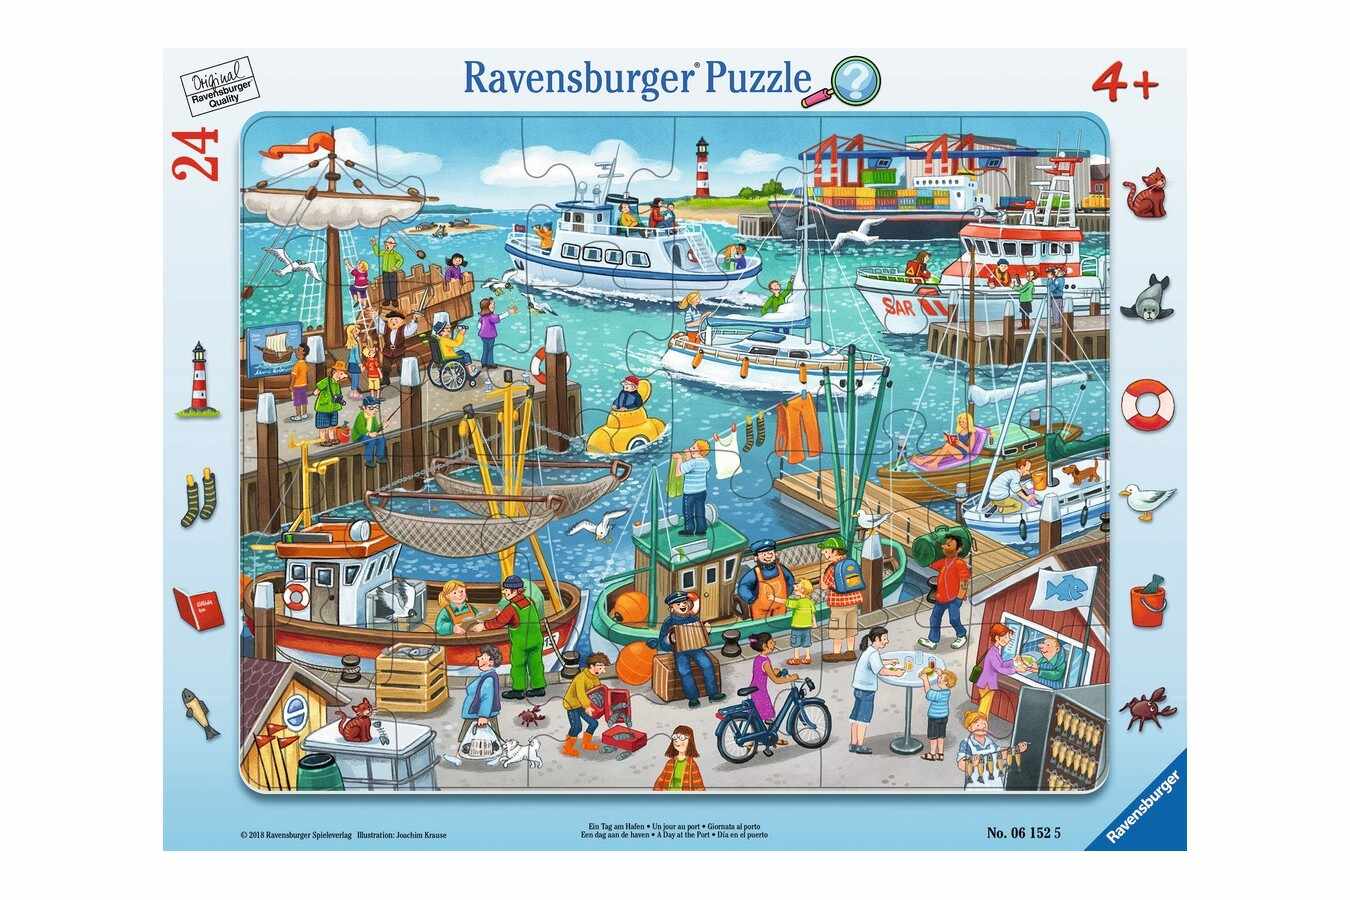 Puzzle Ravensburger - O Zi In Port, 24 piese (06152)